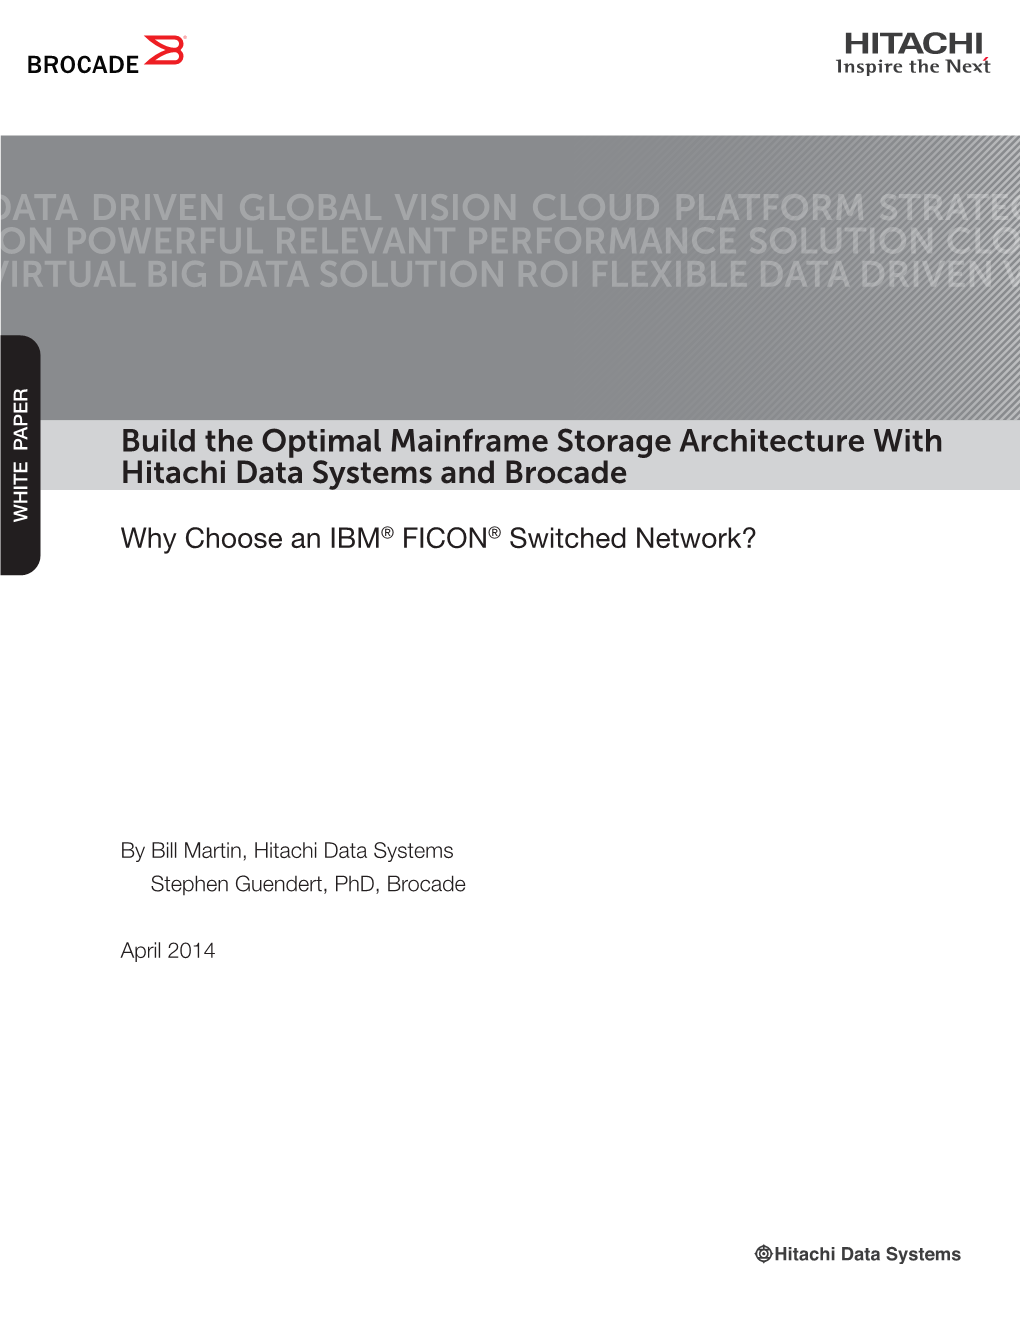 Build the Optimal Mainframe Storage Architecture with Hitachi Data Systems and Brocade WHITE PAPER Why Choose an IBM® FICON® Switched Network?